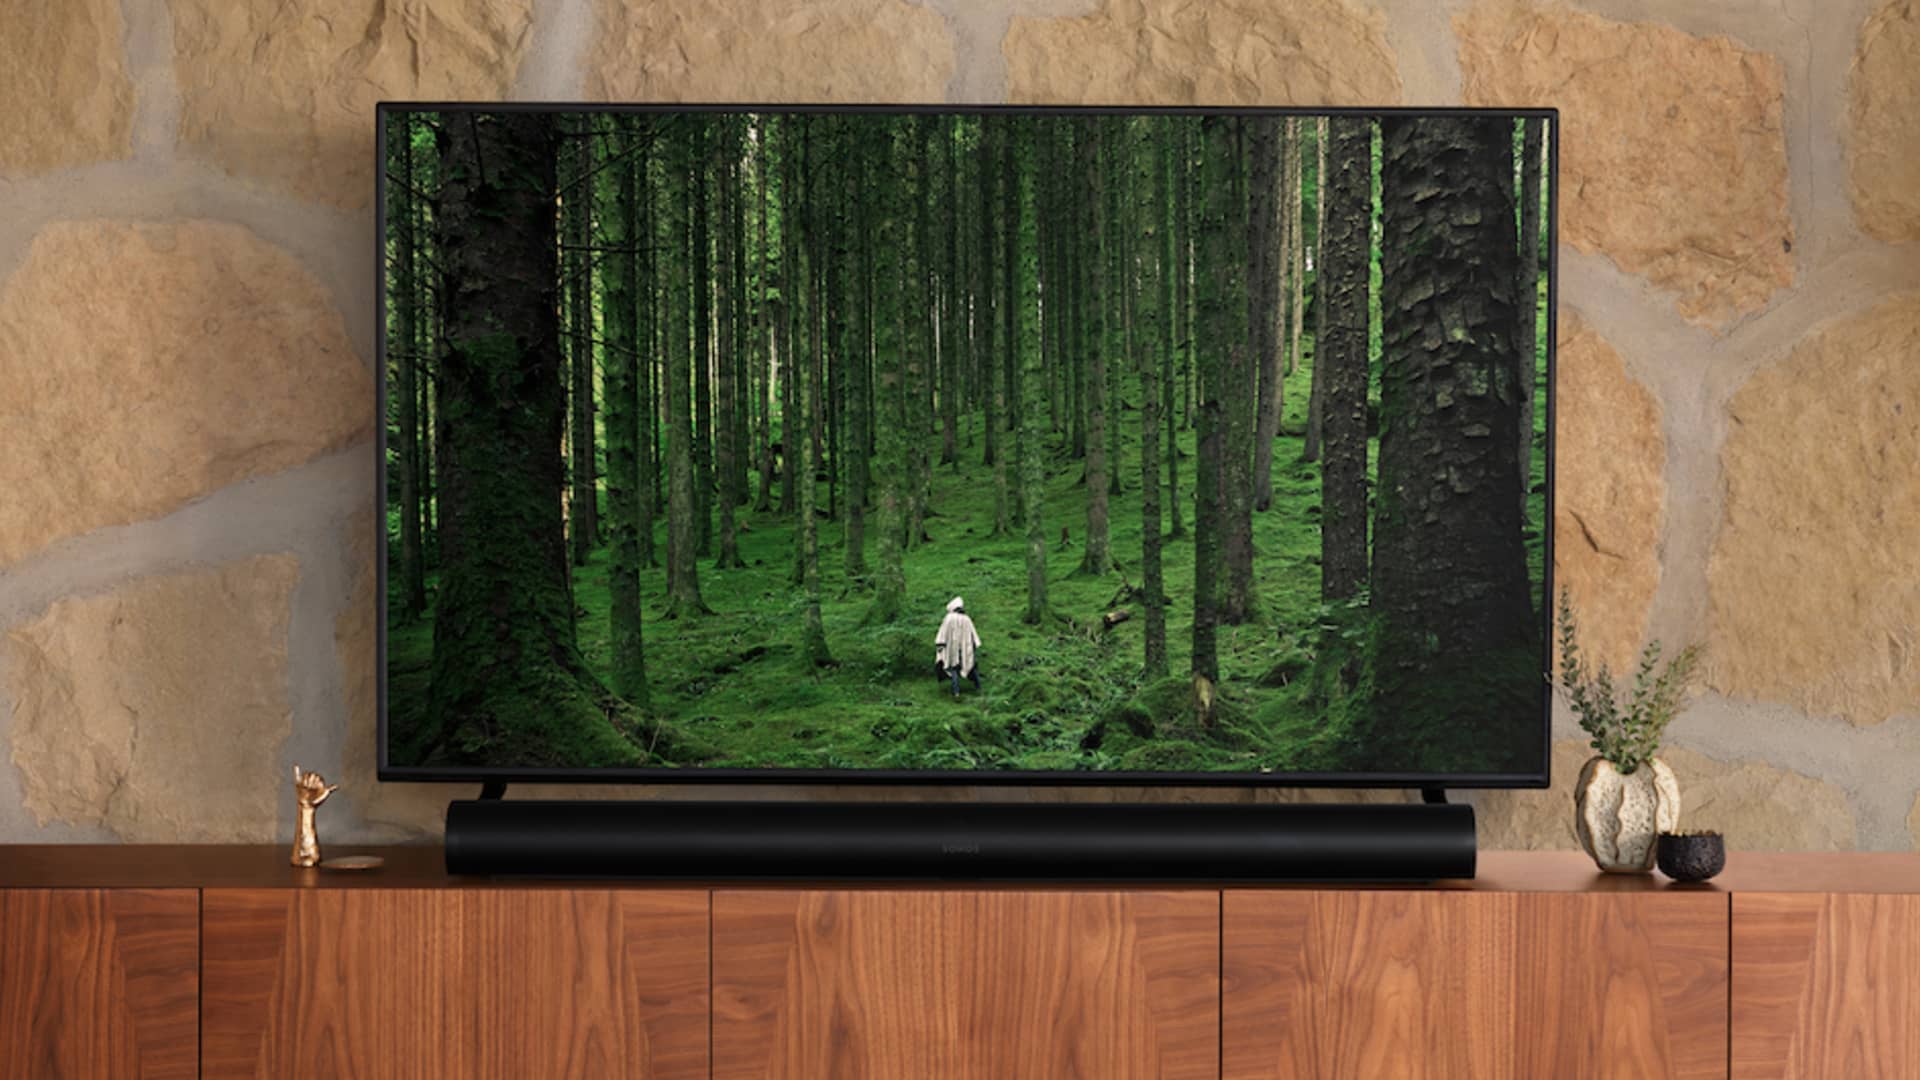 Here’s what you need to know before you shop for a new TV on Black Friday